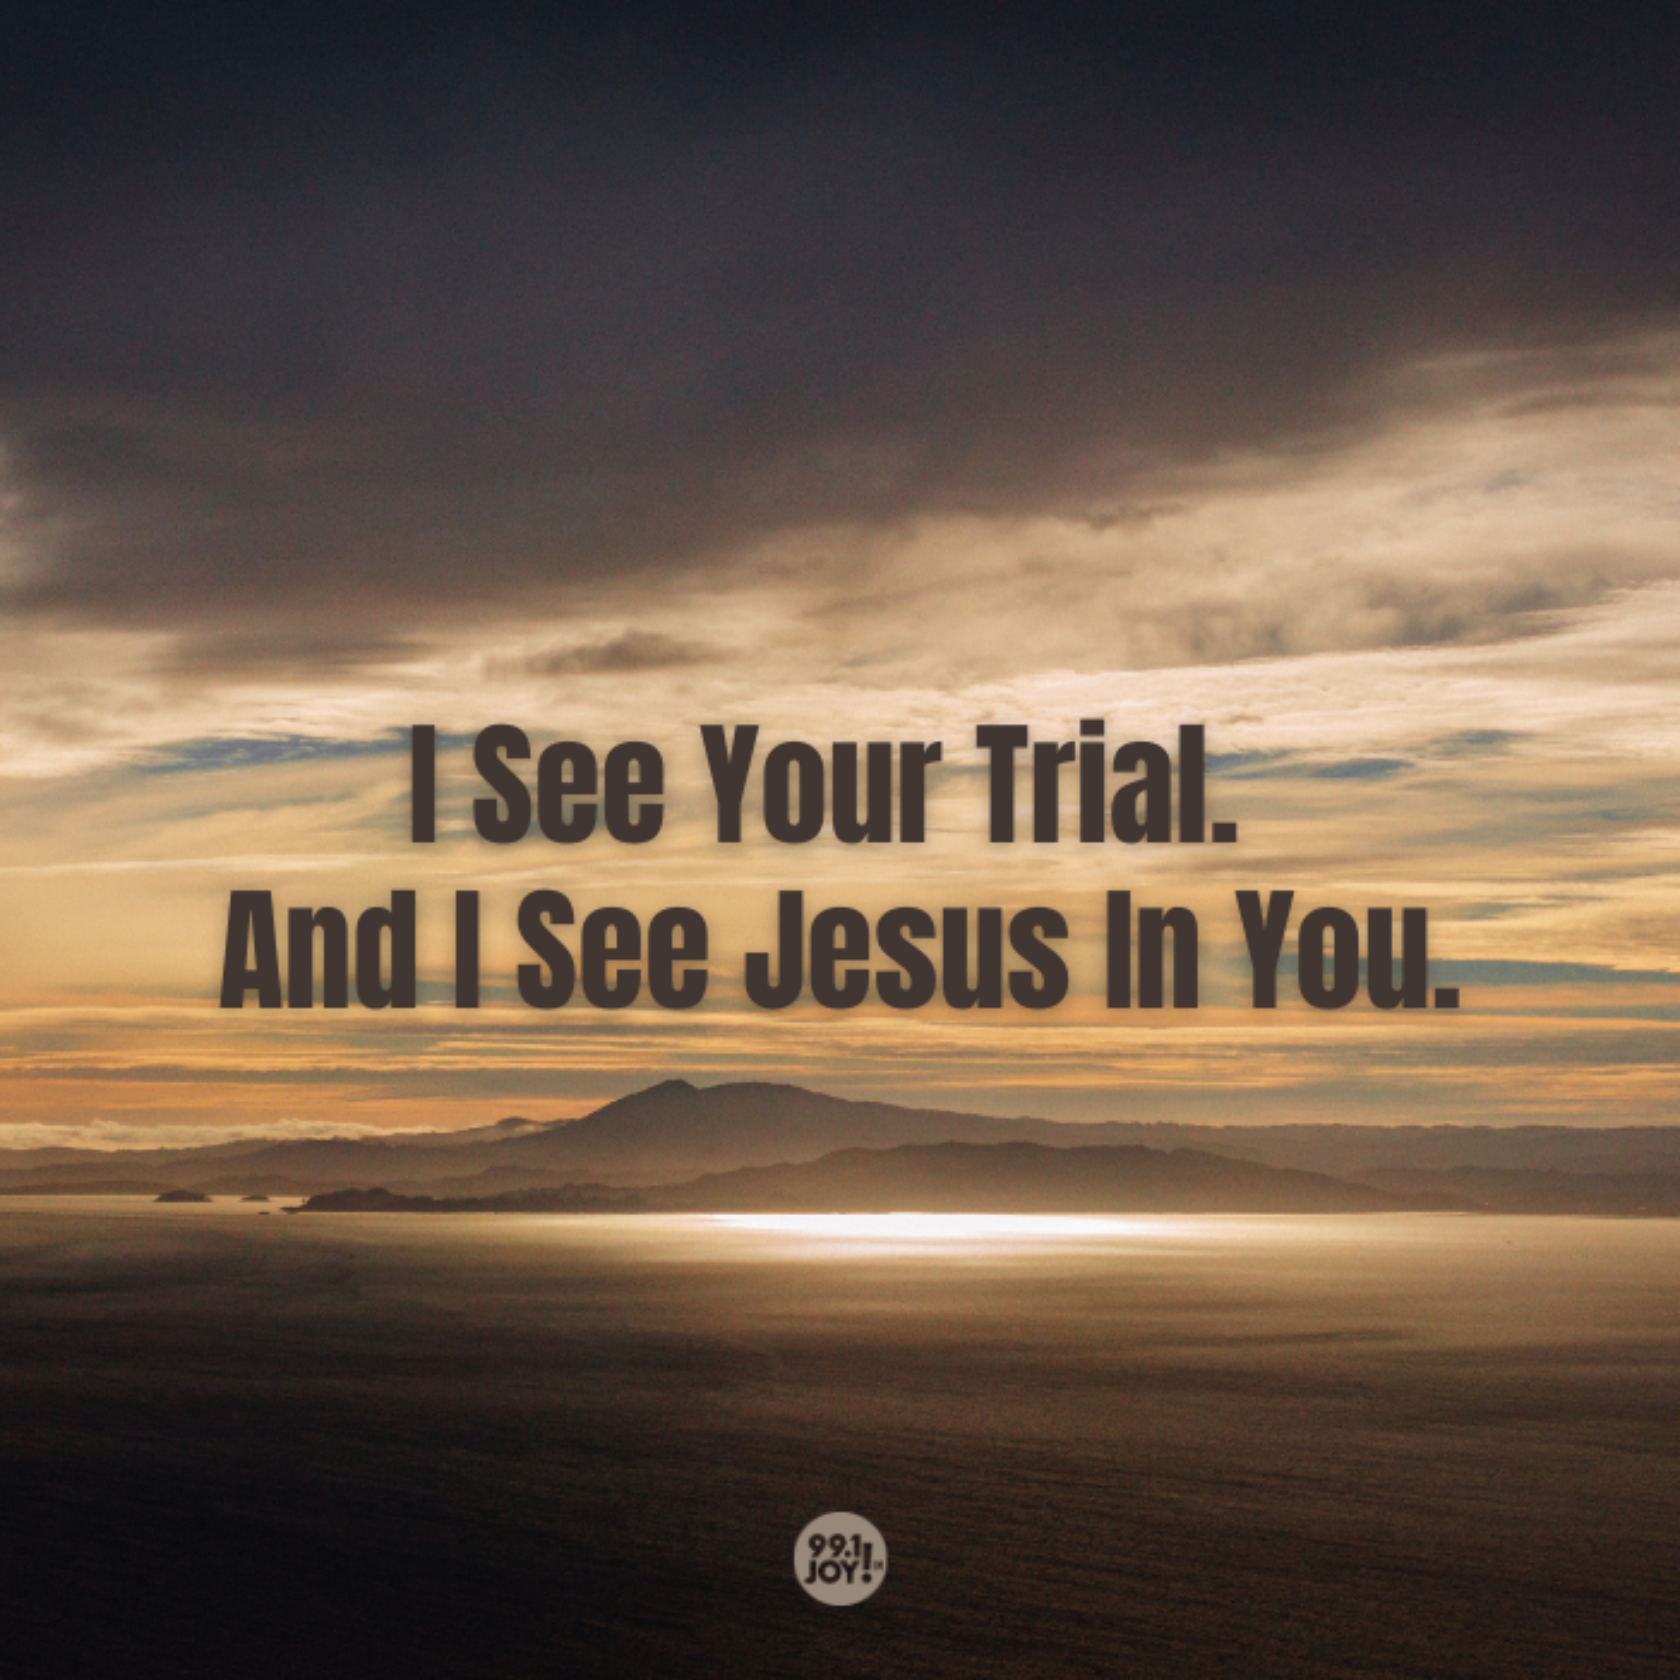 I See Your Trial. And I See Jesus In You.